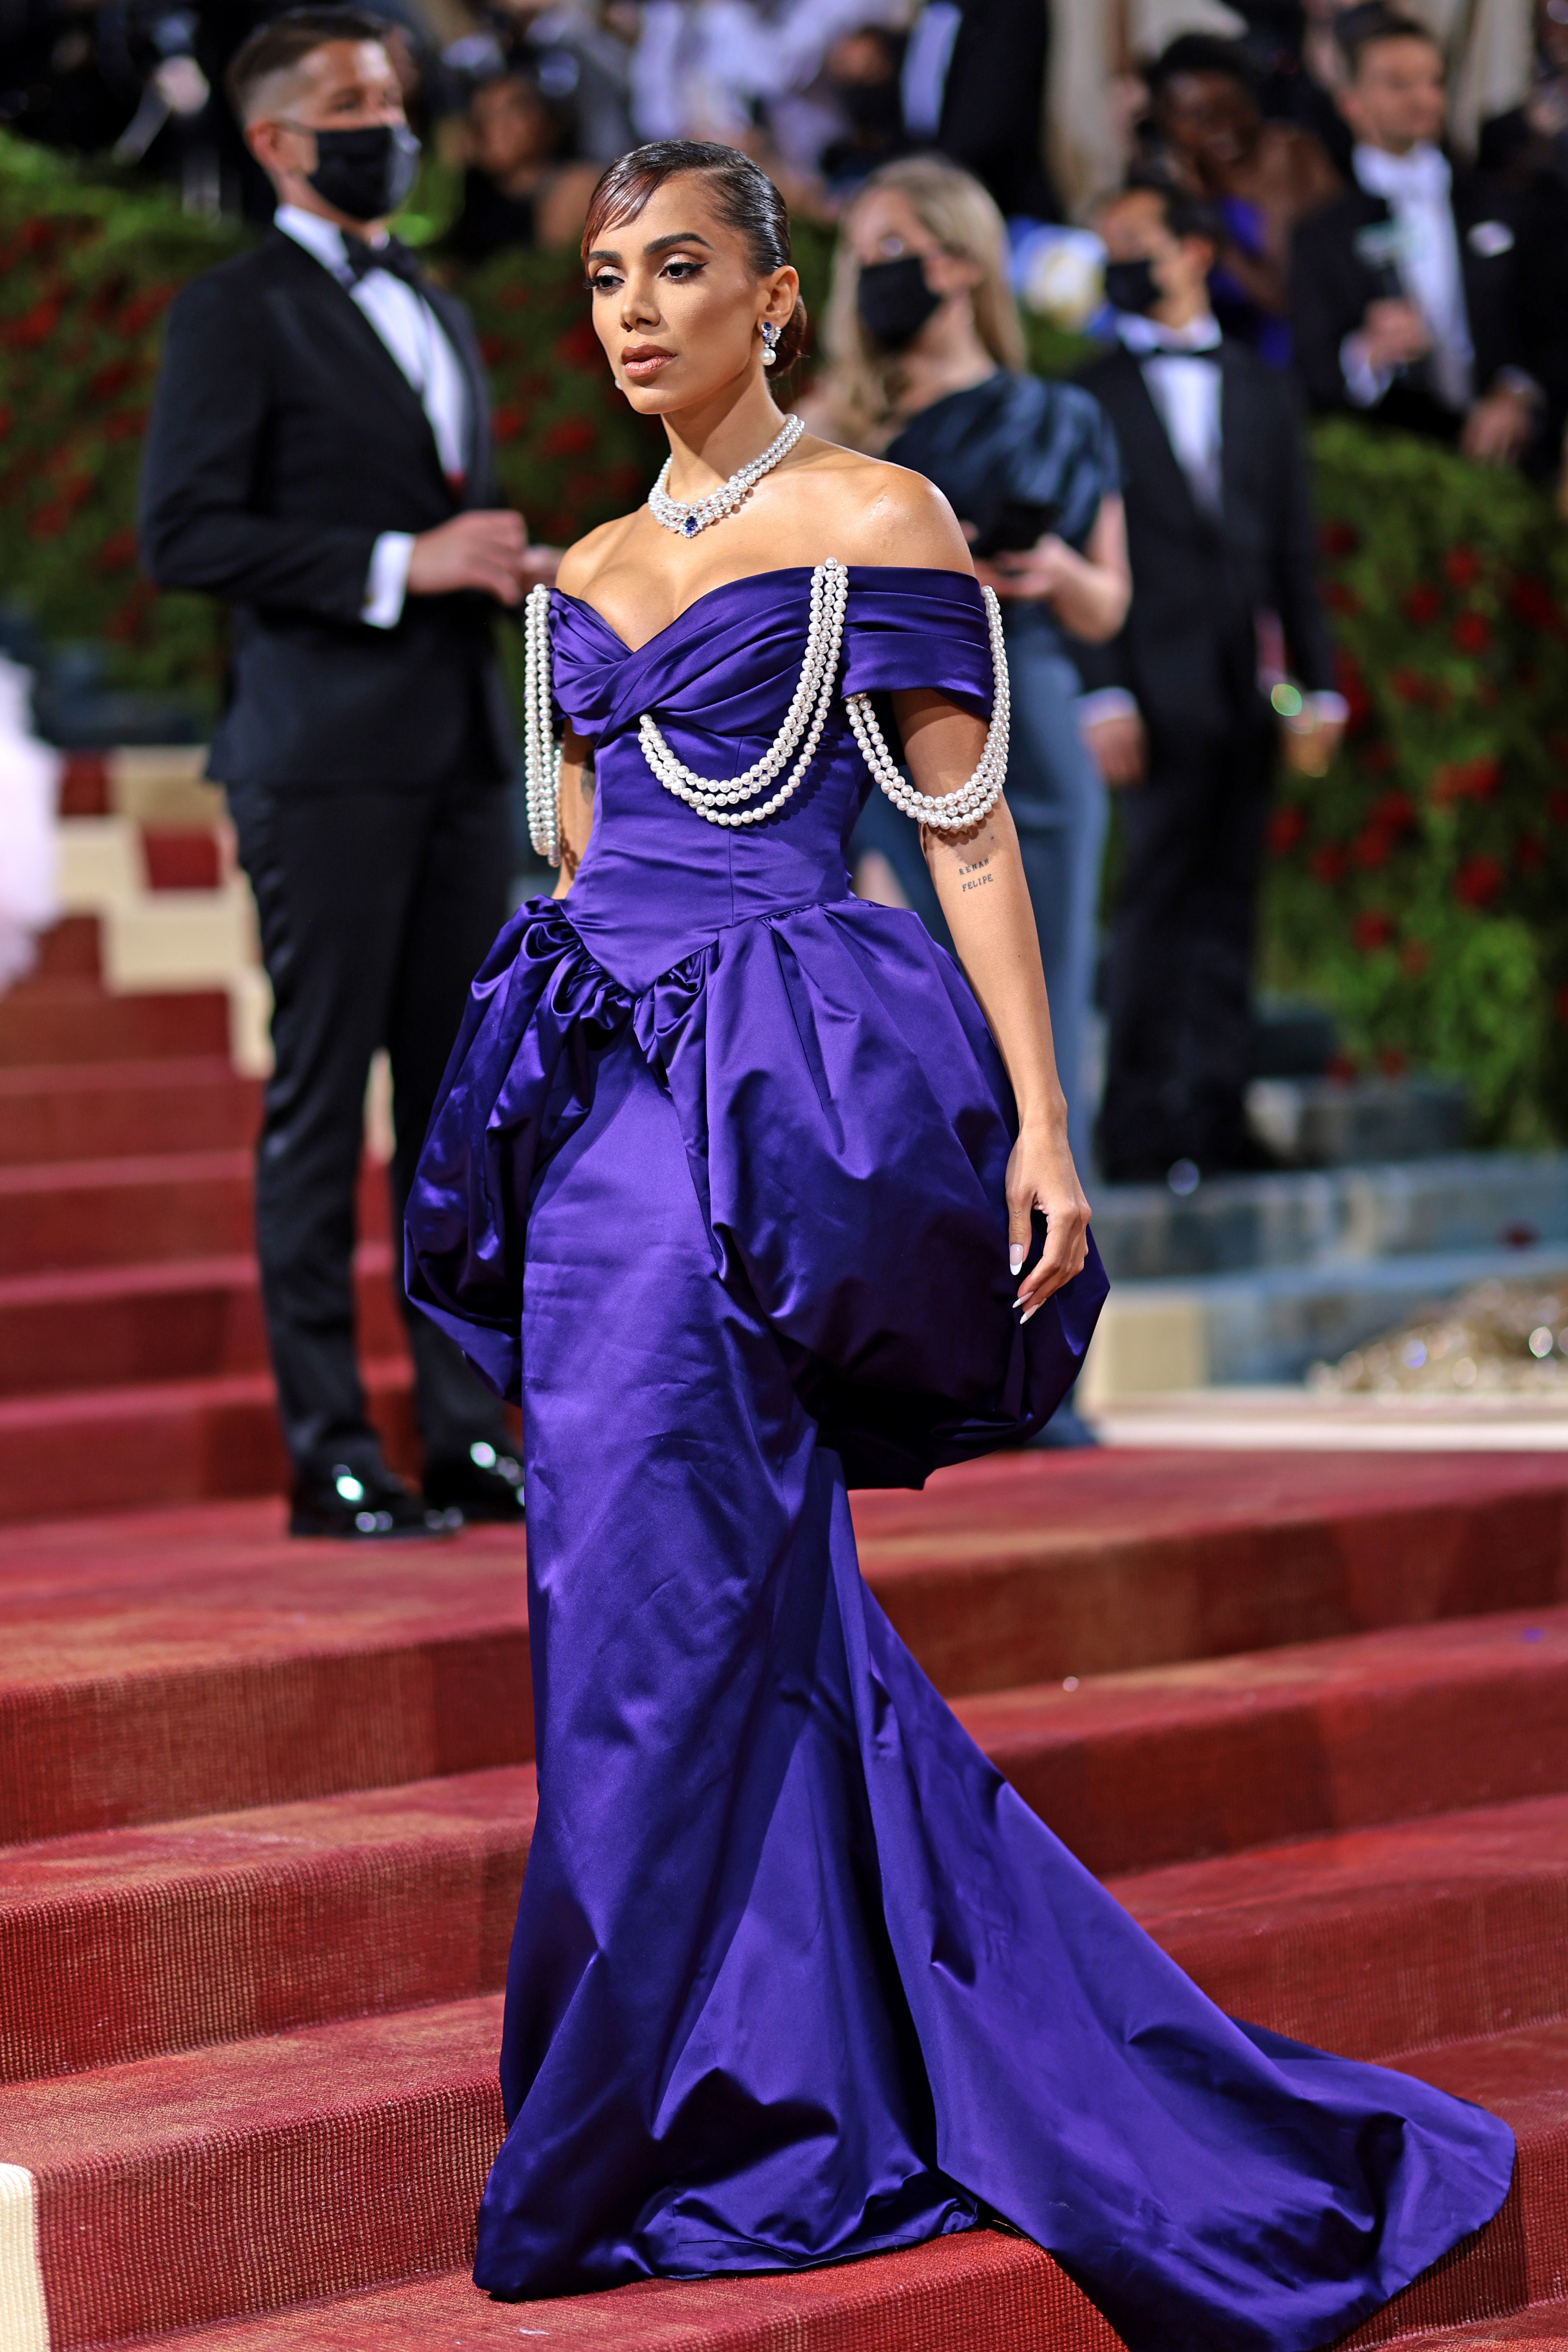 NEW YORK, NEW YORK - MAY 02: Anitta attends The 2022 Met Gala Celebrating "In America: An Anthology of Fashion" at The Metropolitan Museum of Art on May 02, 2022 in New York City. (Photo by Dimitrios Kambouris/Getty Images for The Met Museum/Vogue) (Foto: Getty Images for The Met Museum/)